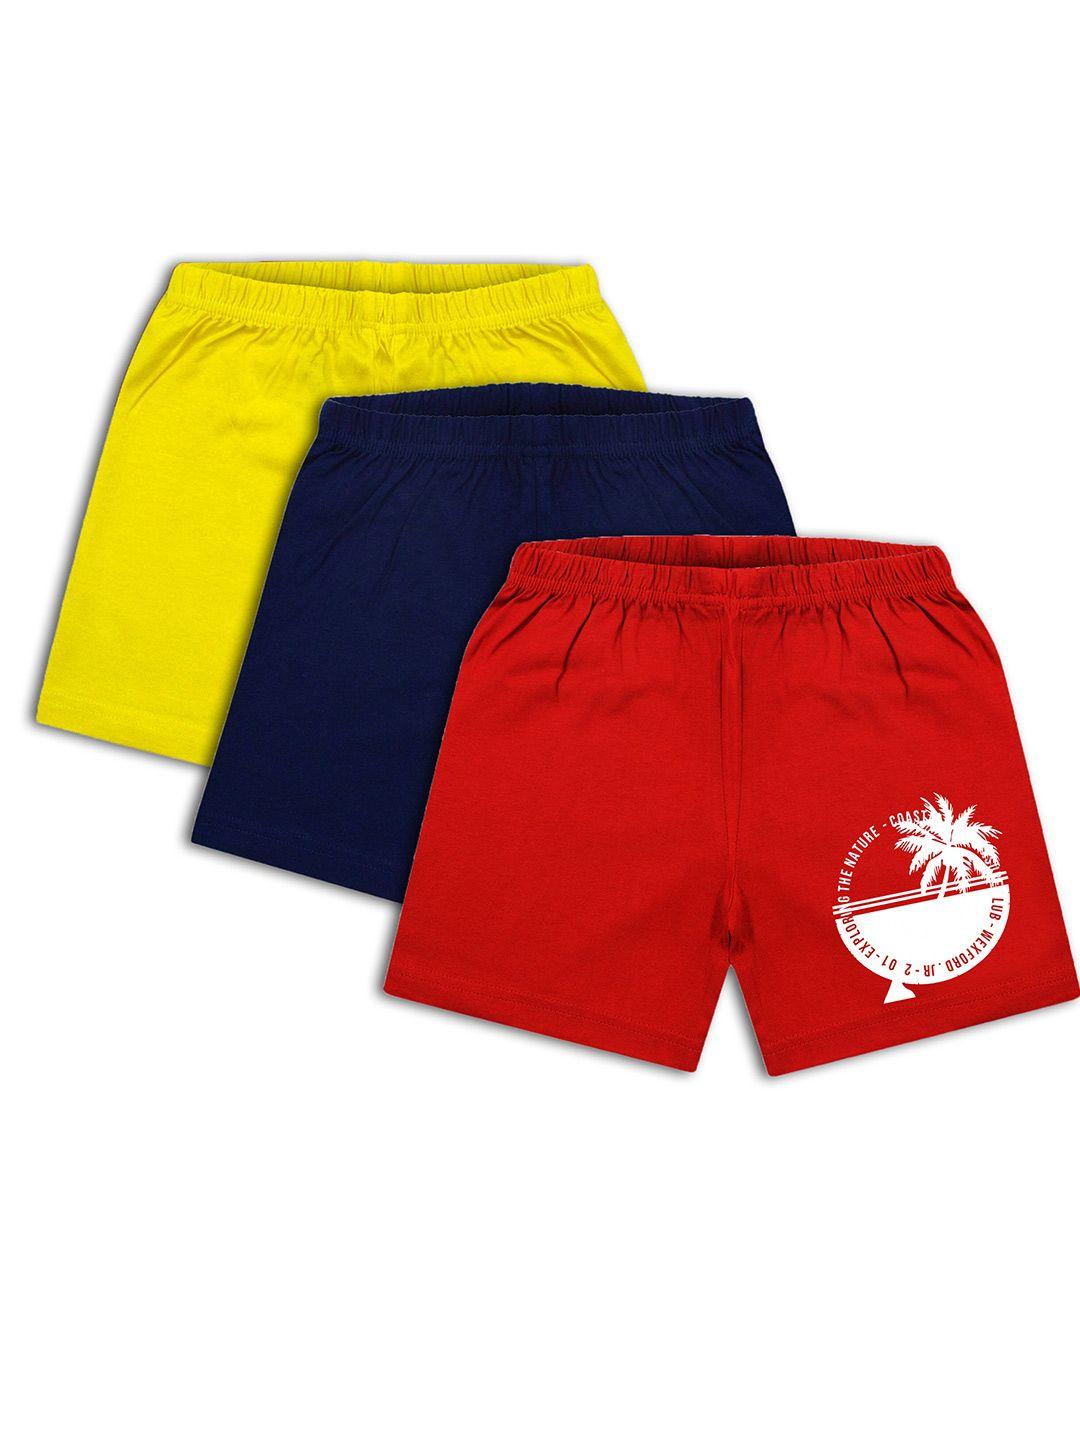 cooltees4u-boys-pack-of-3-printed-mid-rise-cotton-shorts